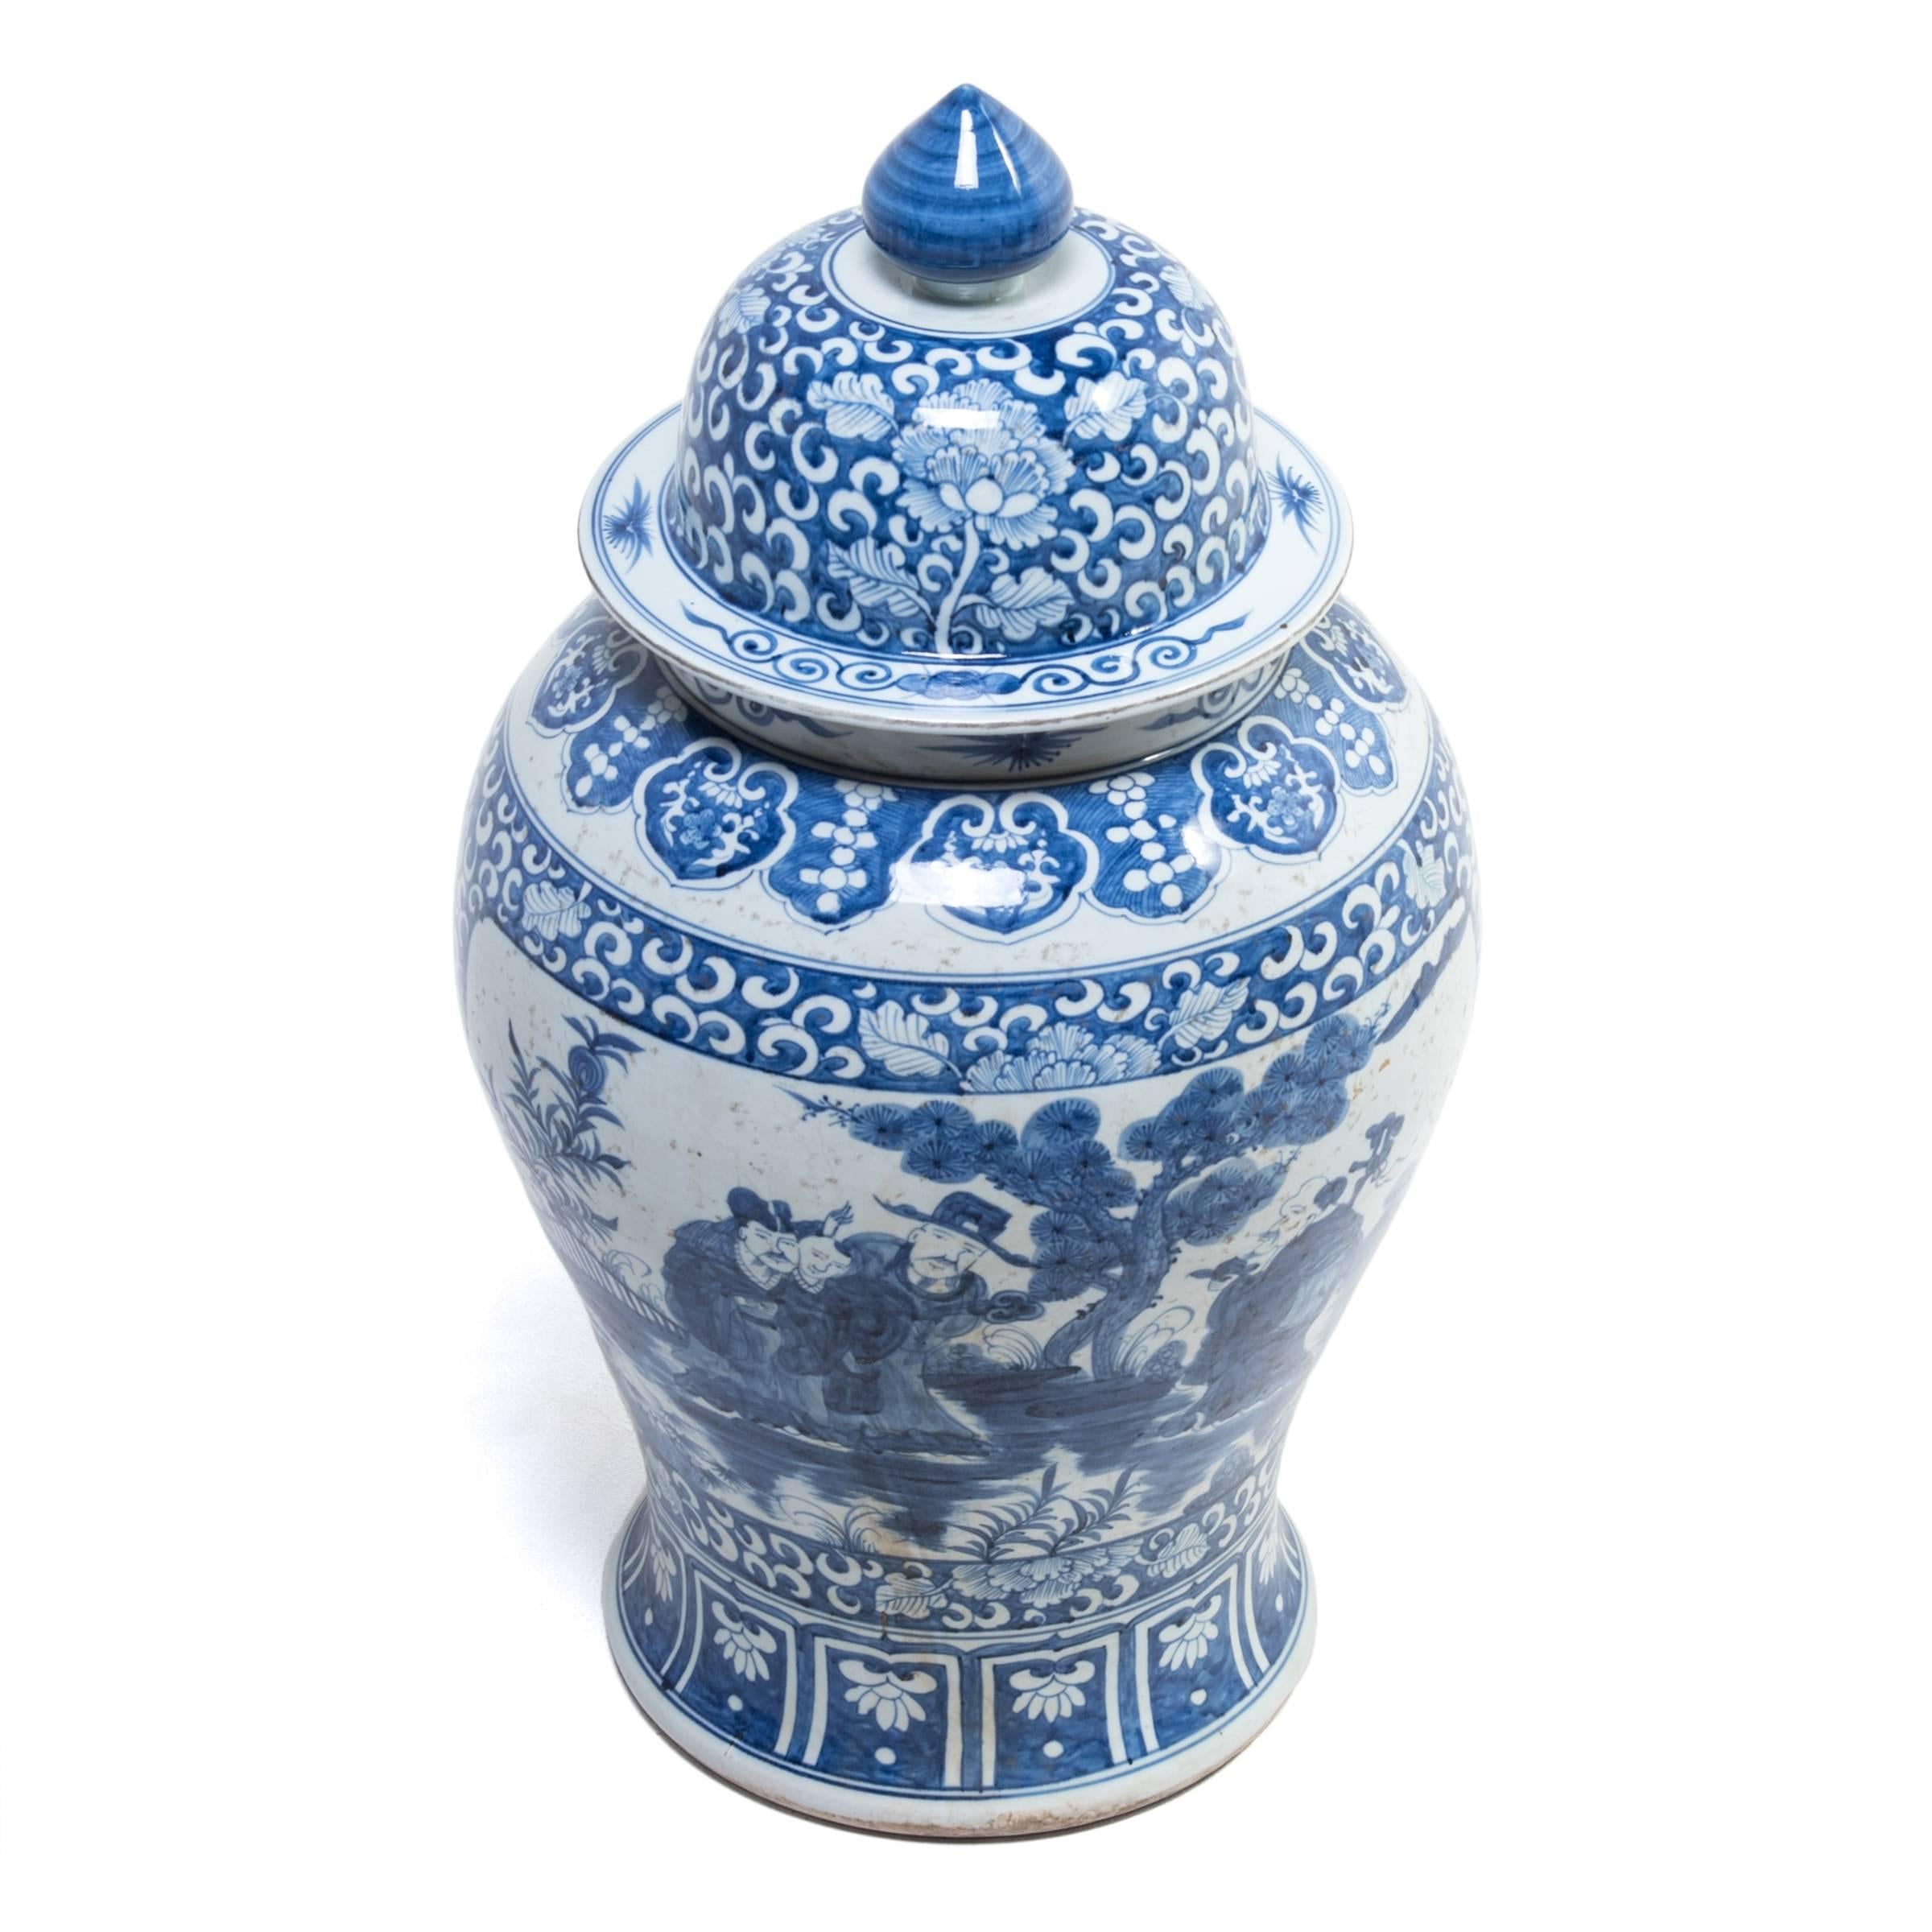 Ceramic Blue and White Ginger Jar with Scholars in a Garden Portraits